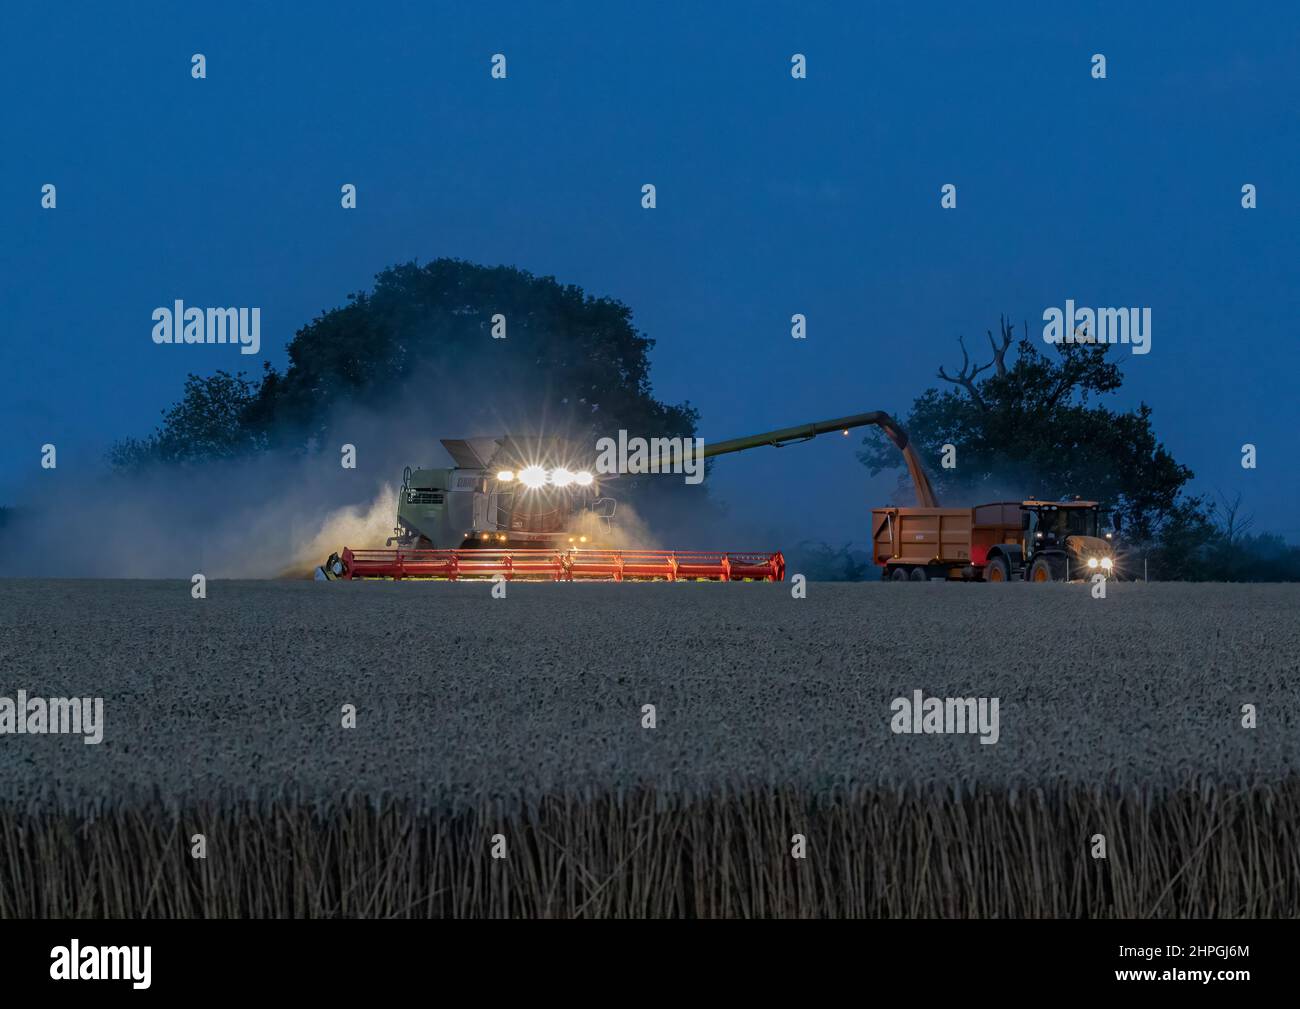 The Harvest is underway and continuing into the night. A Combine Harvester unloading grain into the adjacent tractor and trailer. Suffolk, Uk Stock Photo